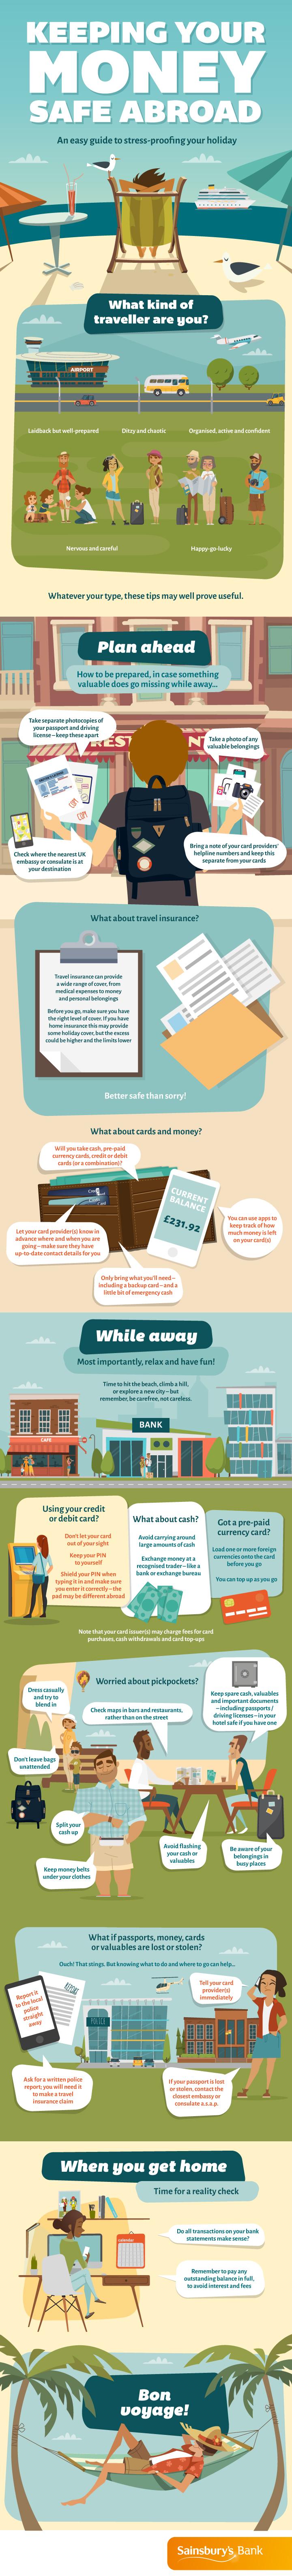 Visual guide to keeping your money safe abroad 